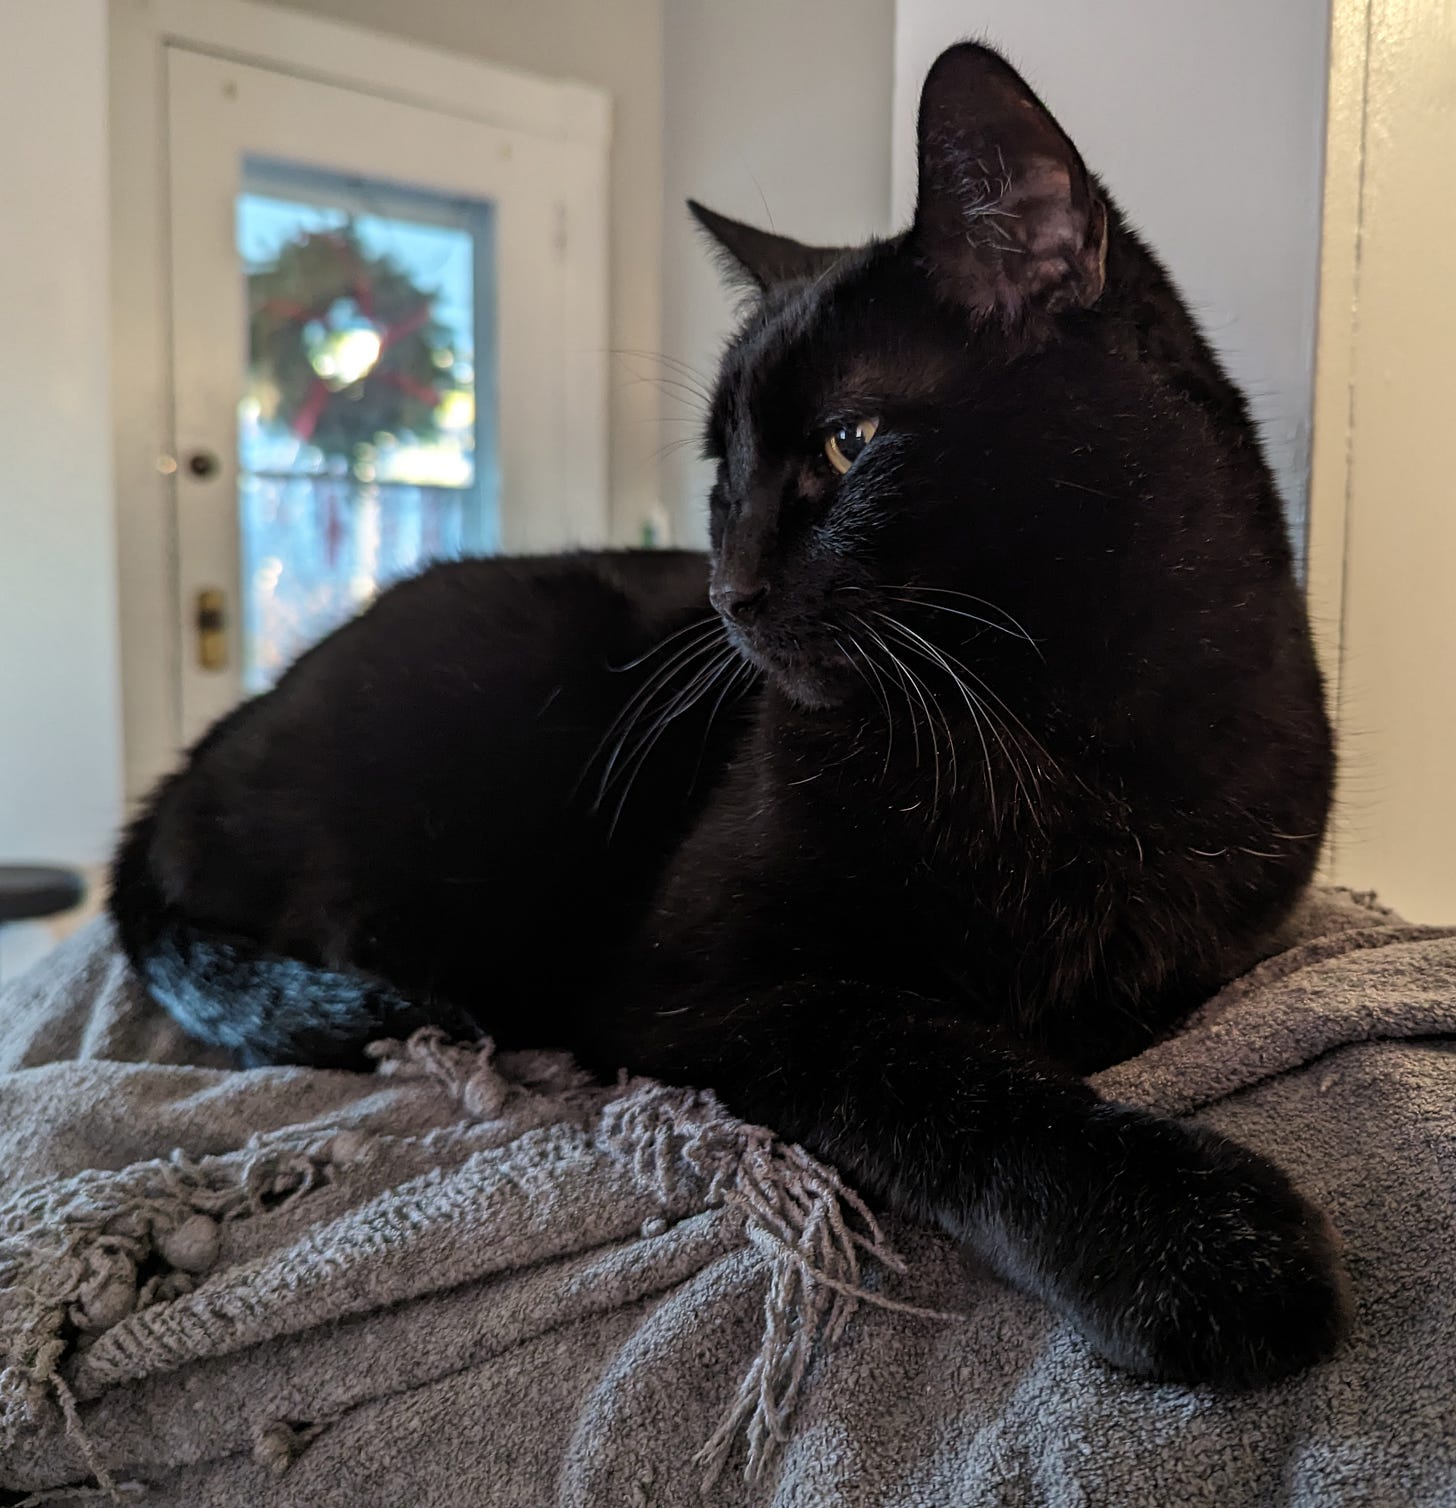 A black cat reclines on a gray blanket draped on the back of a couch. A Christmas wreath is visible on the front door in the background.